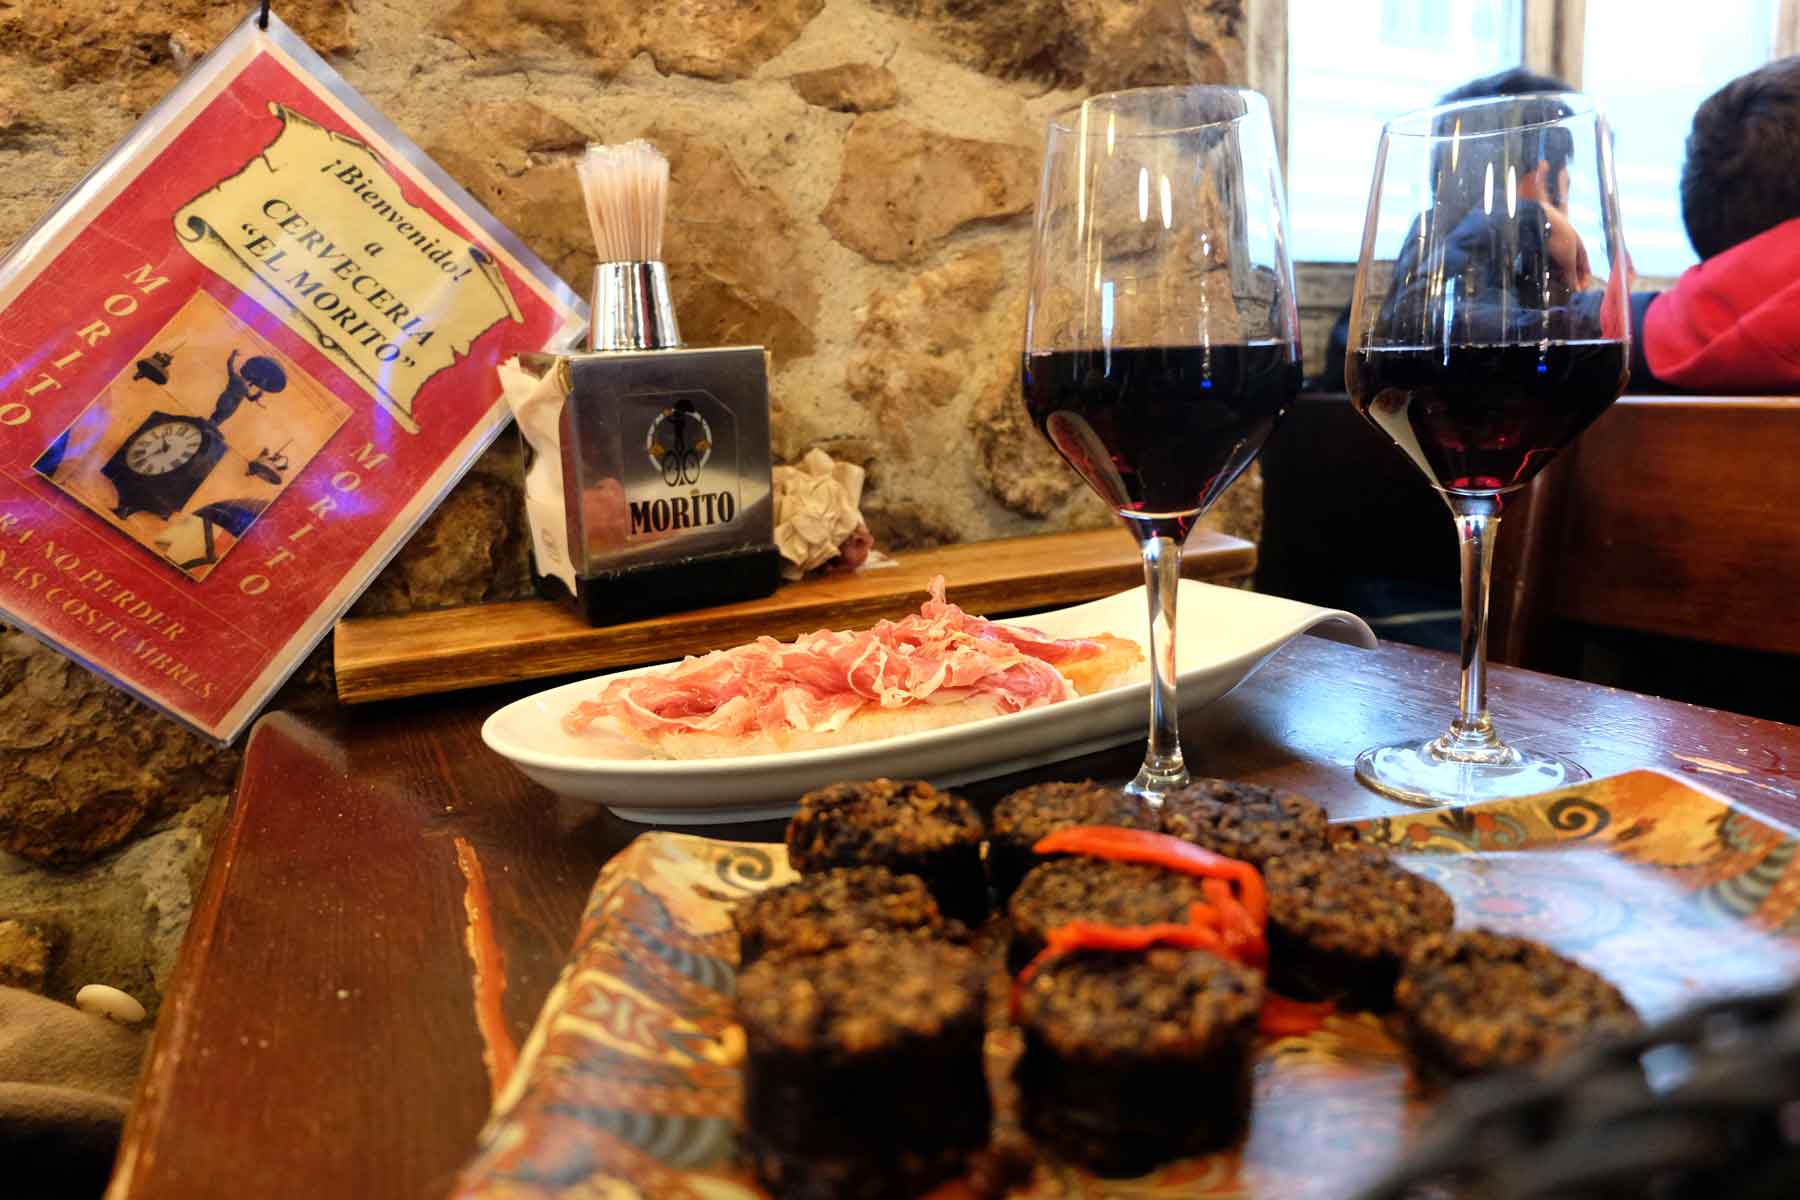 Spanish morcilla has many variants. The most well-known and widespread is morcilla de Burgos which contains mainly pork blood and fat, rice, onions, and salt @ El Morito | Photo: Superminimaps.